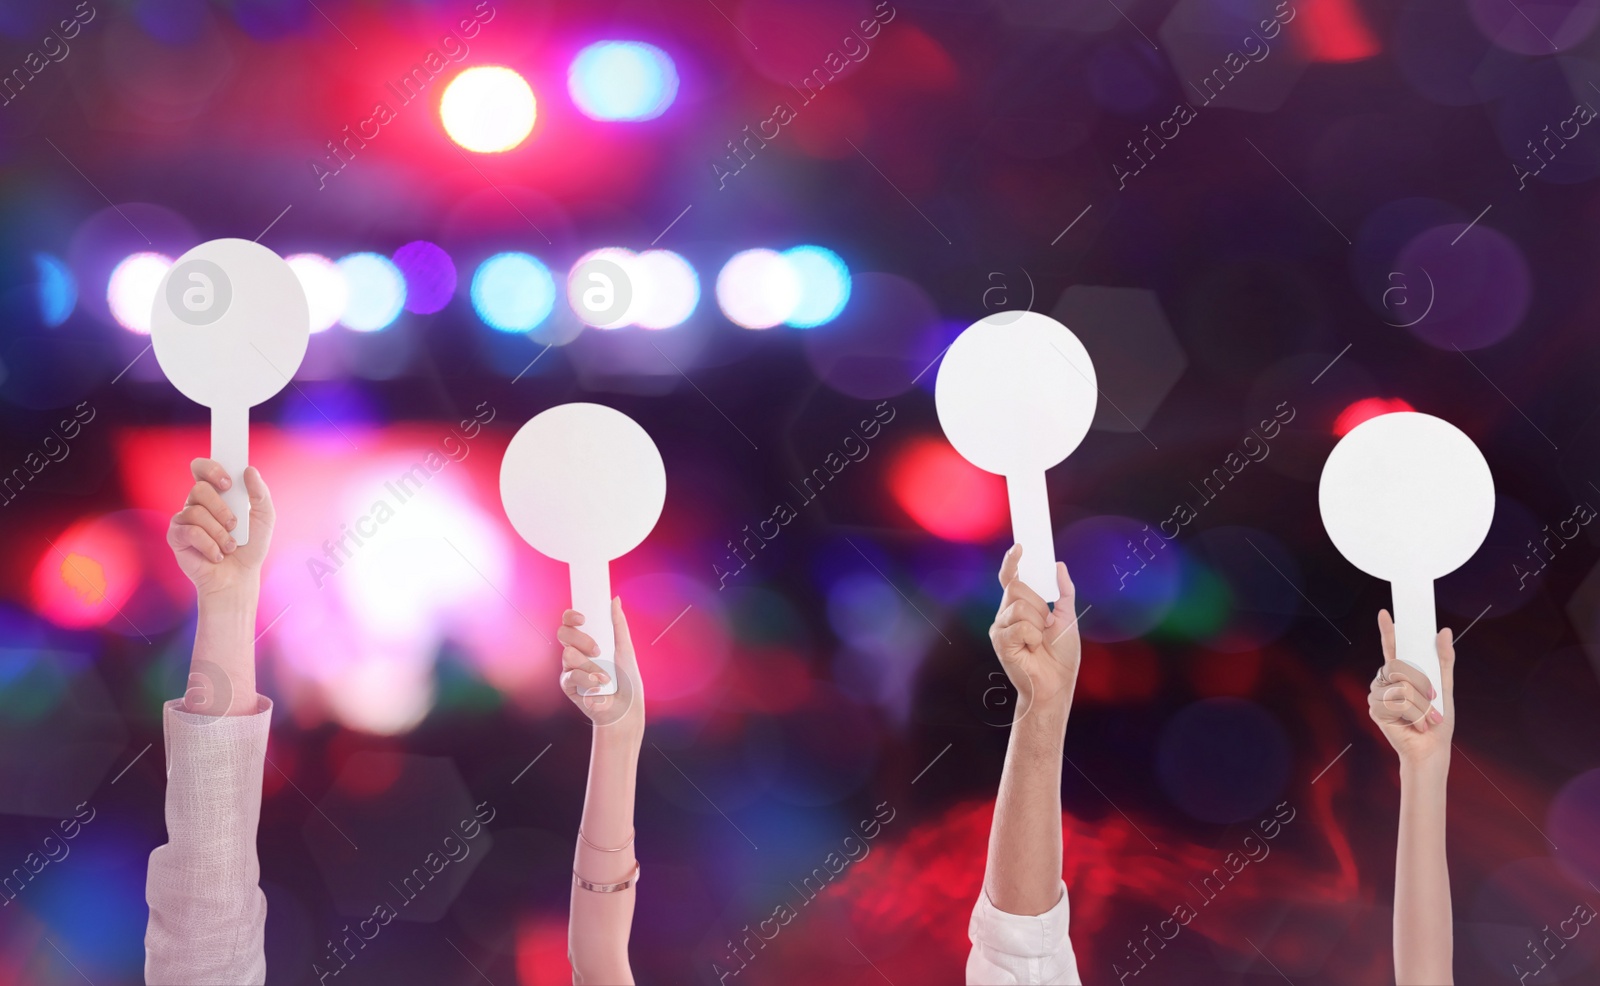 Image of Panel of judges holding blank score signs against blurred background, closeup. Bokeh effect